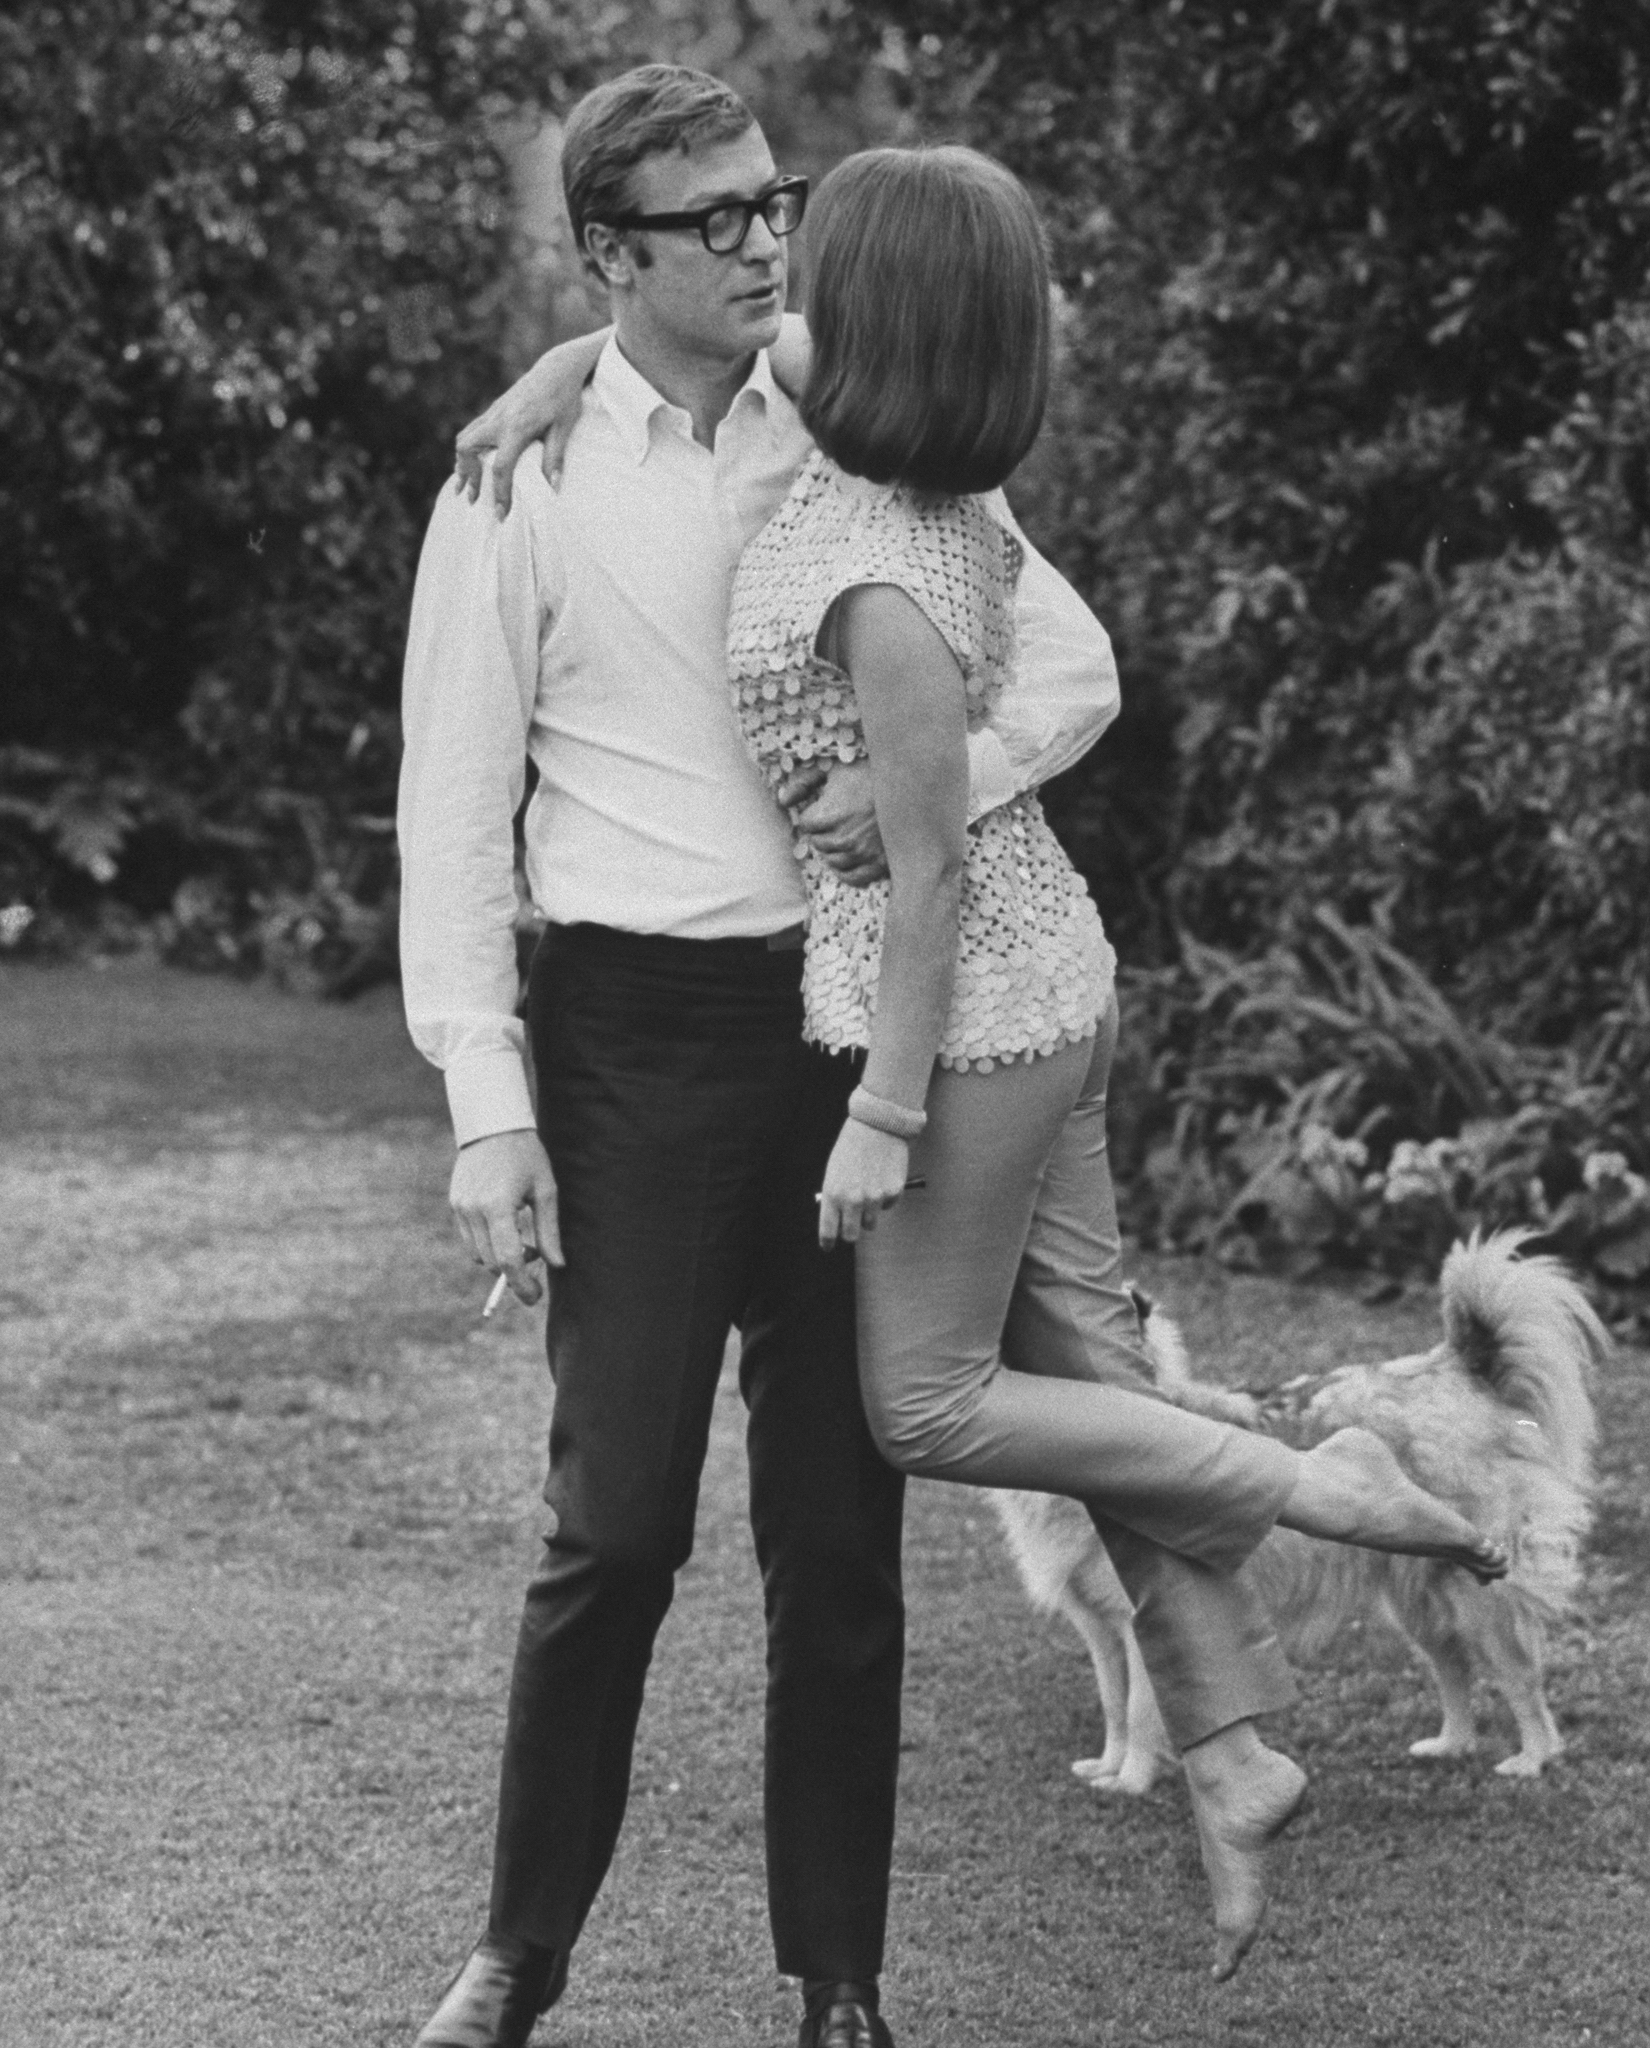 British actor Michael Caine with Natalie Wood in 1966, in one of the many photos that have made the rounds online. (Bill Ray—The LIFE Picture Collection/Getty Images)